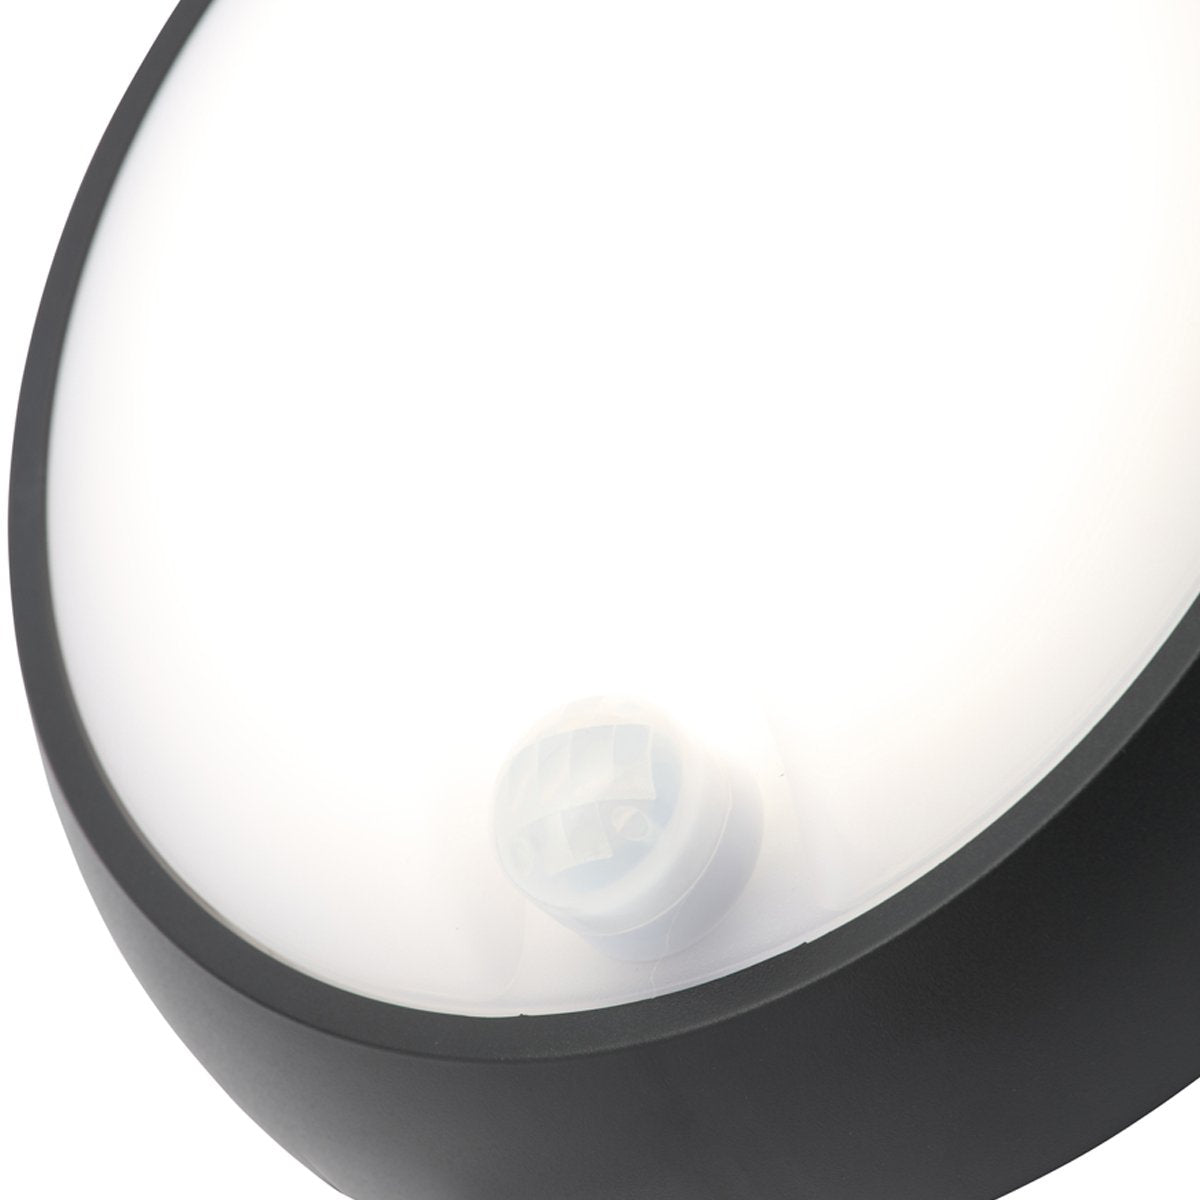 Zara black and white round wall light with motion sensor is an modern simple fitting with a black polycarbonate body and opal diffuser. This stylish wall light is perfect for adding a pinch of modern flavour to doorways, sheds, patios, porch, driveways, garages, sheds, and more. This fitting is IP54 rated which makes it fully weatherproof light fitting.